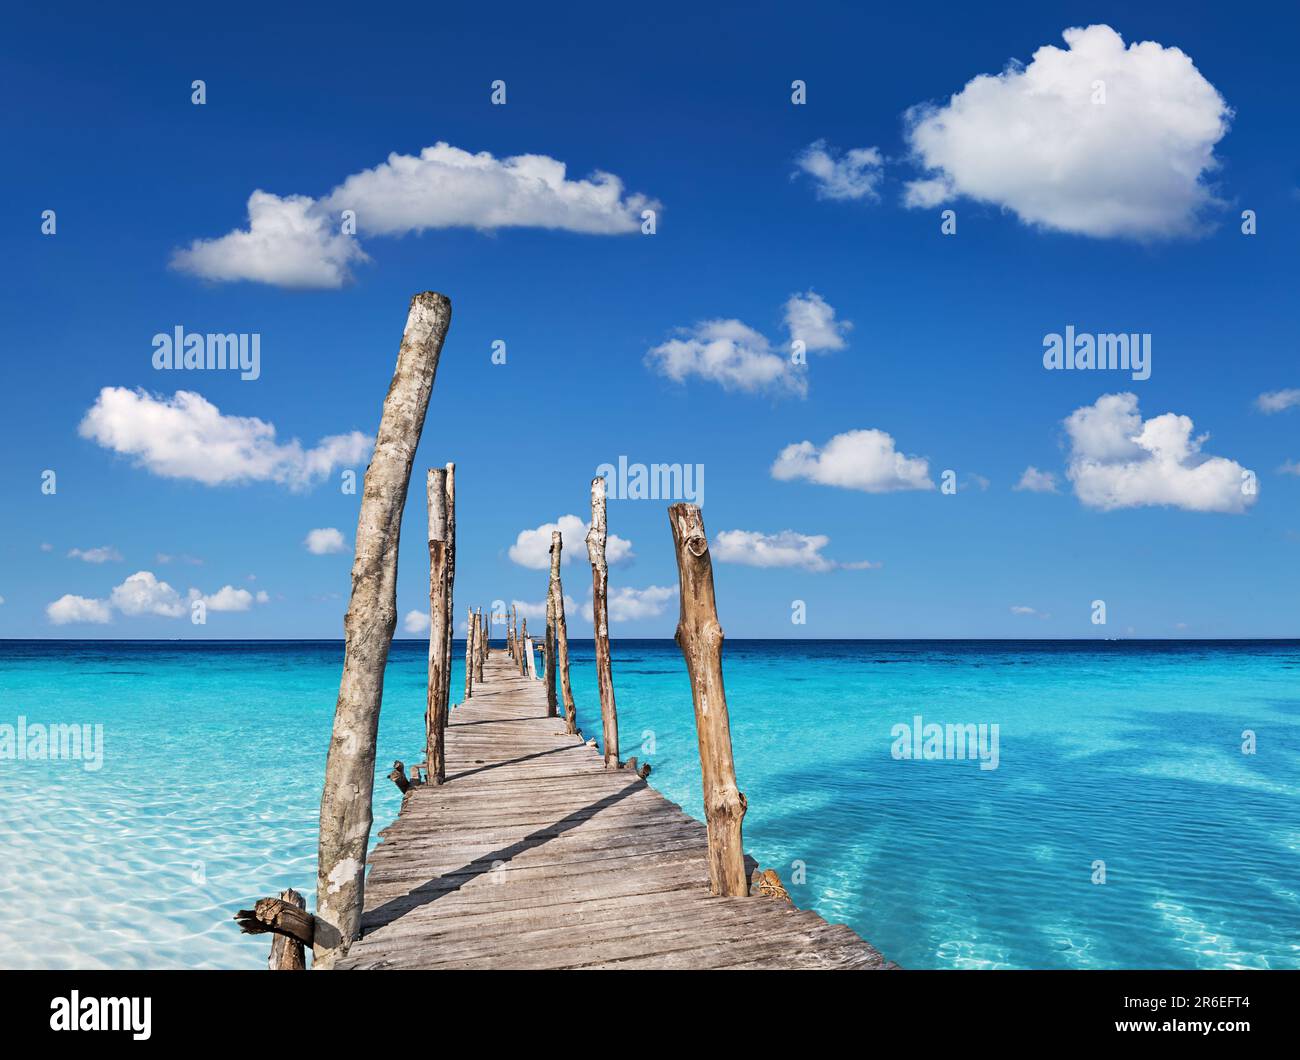 Wooden pier on the tropical island, clear sea and blue sky Stock Photo